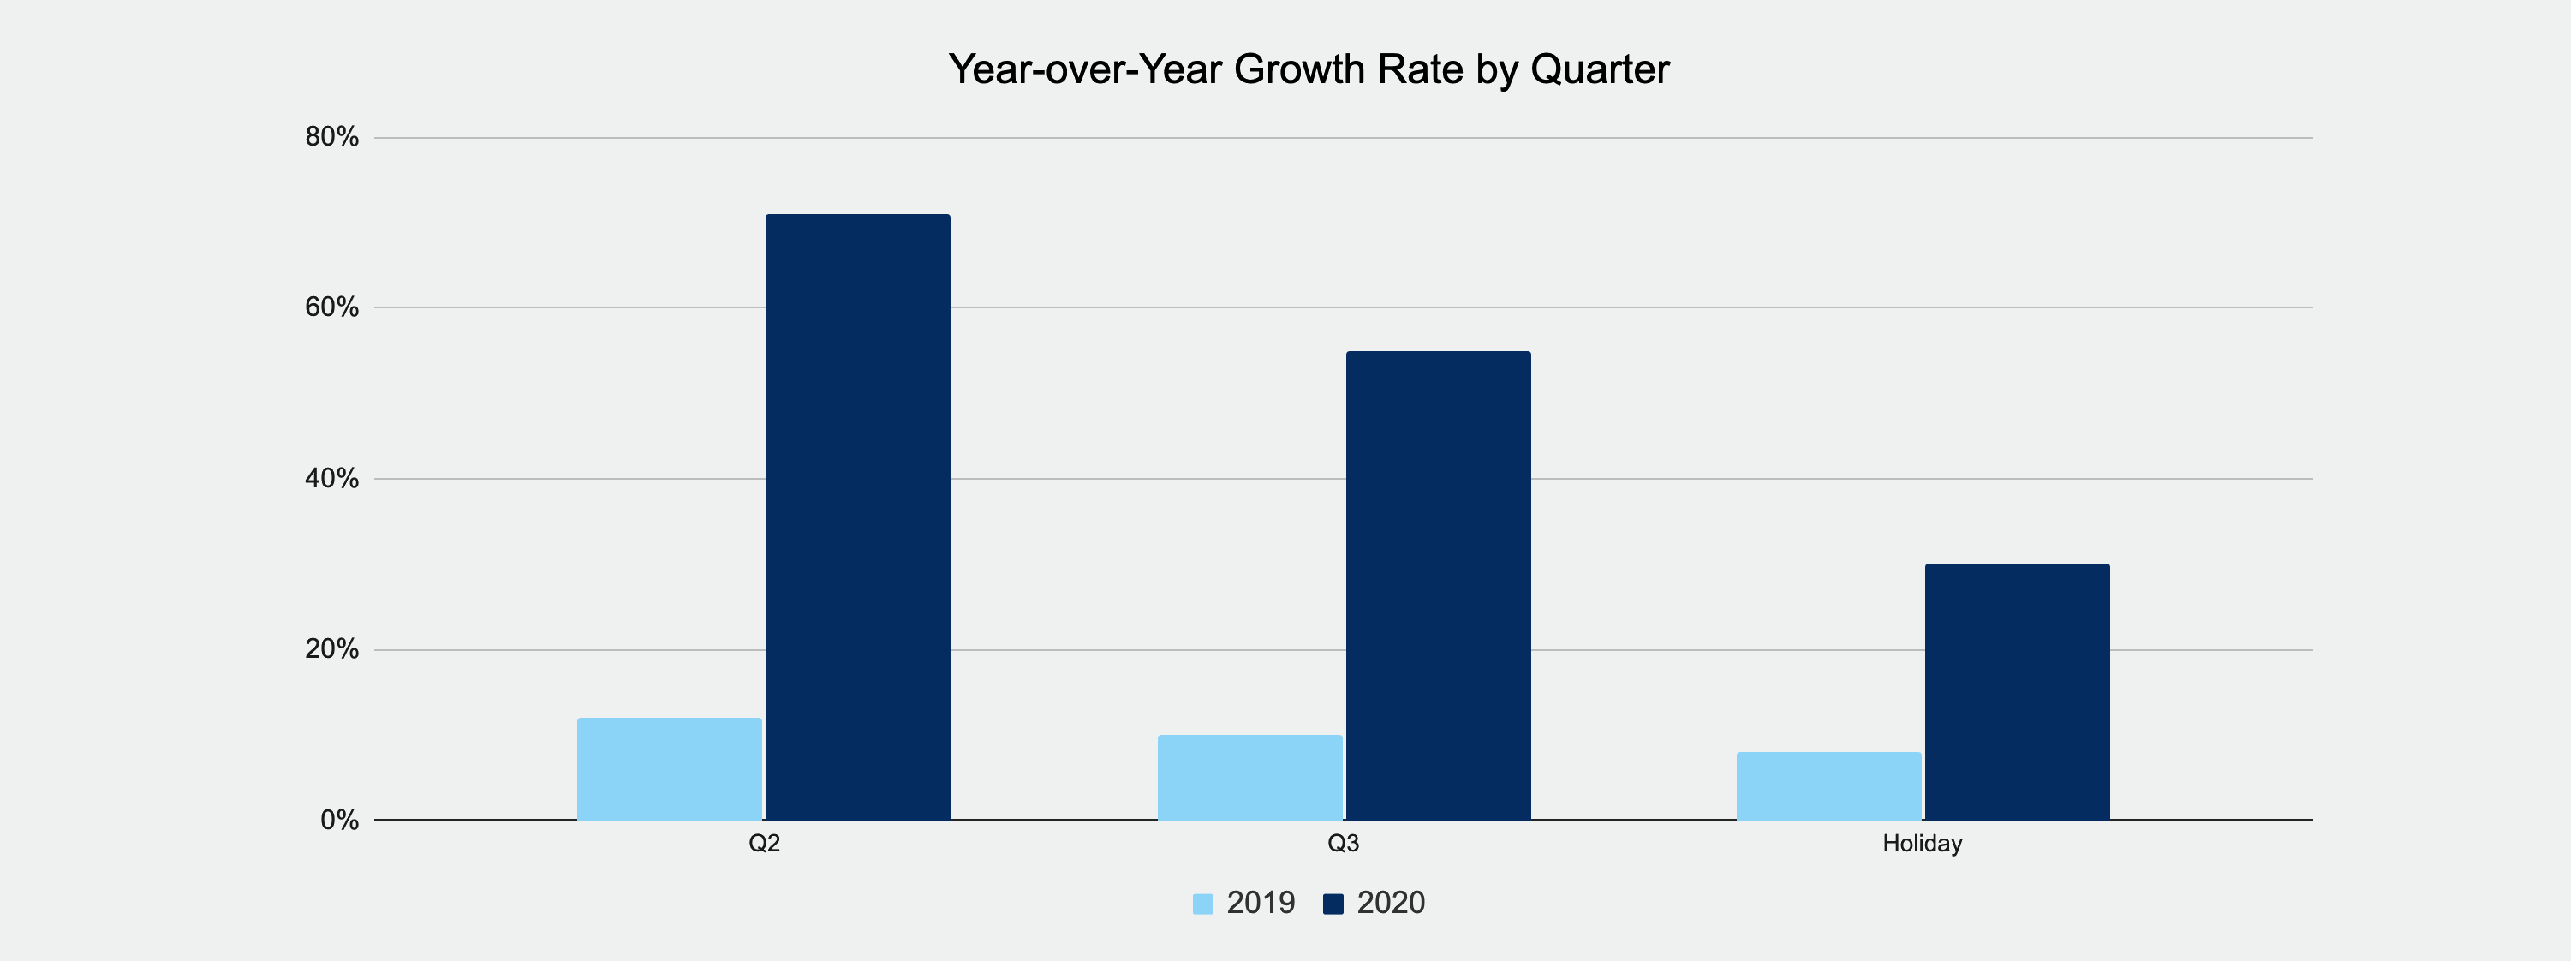 Year-over-year growth rate by quarter